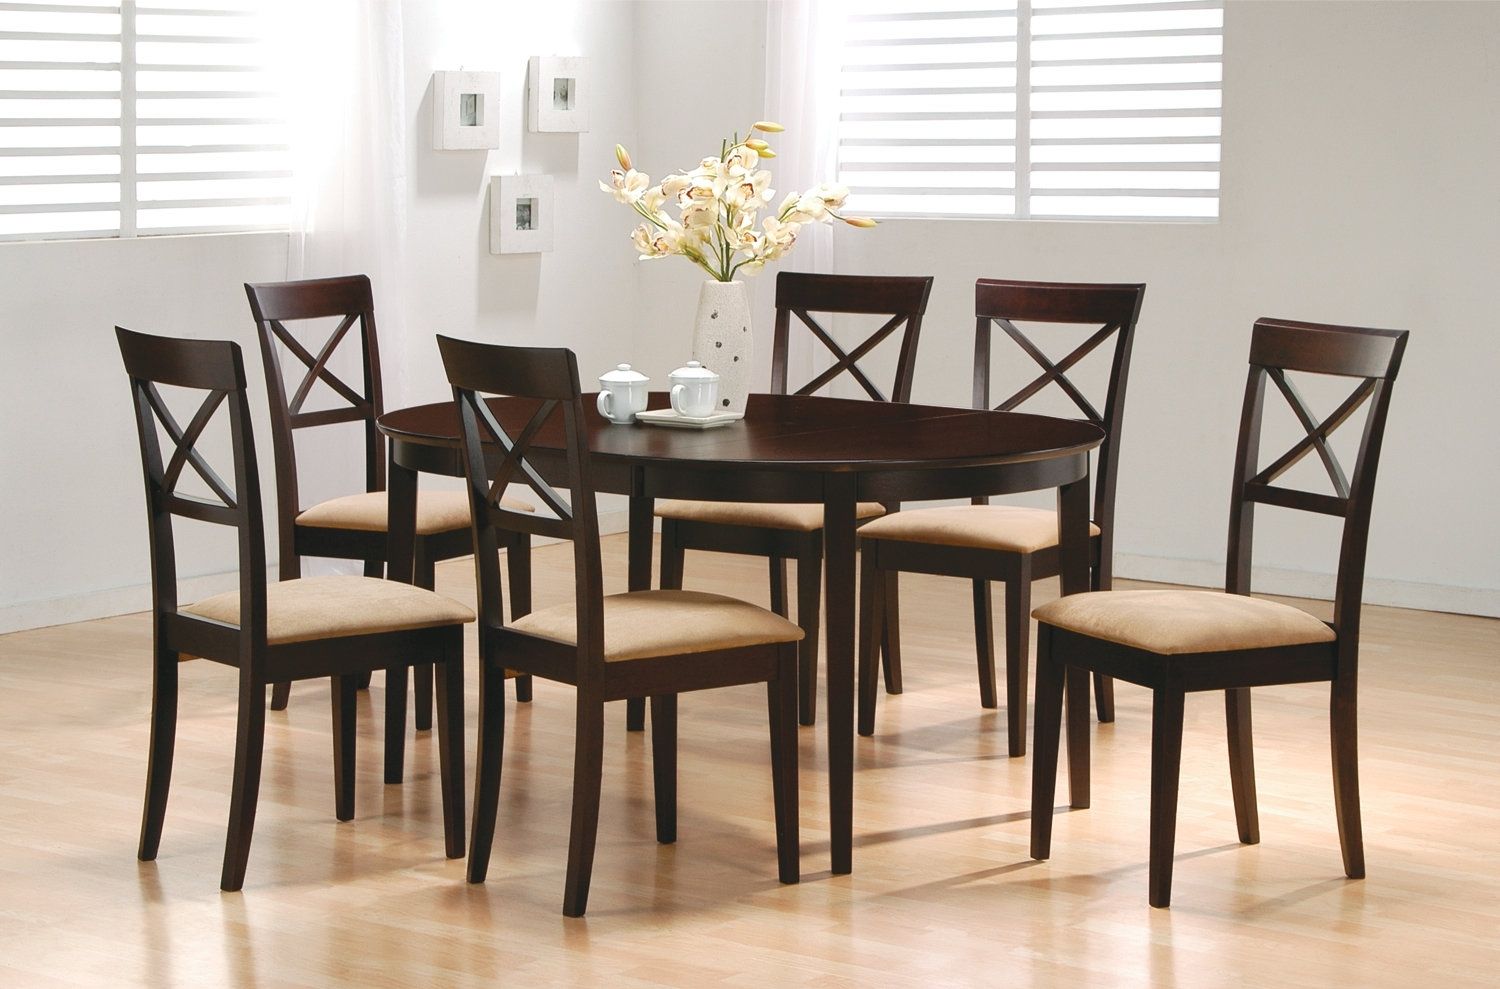 Wildon Home ® Crawford 7 Piece Dining Set & Reviews | Wayfair Regarding Most Up To Date Crawford 6 Piece Rectangle Dining Sets (View 1 of 20)